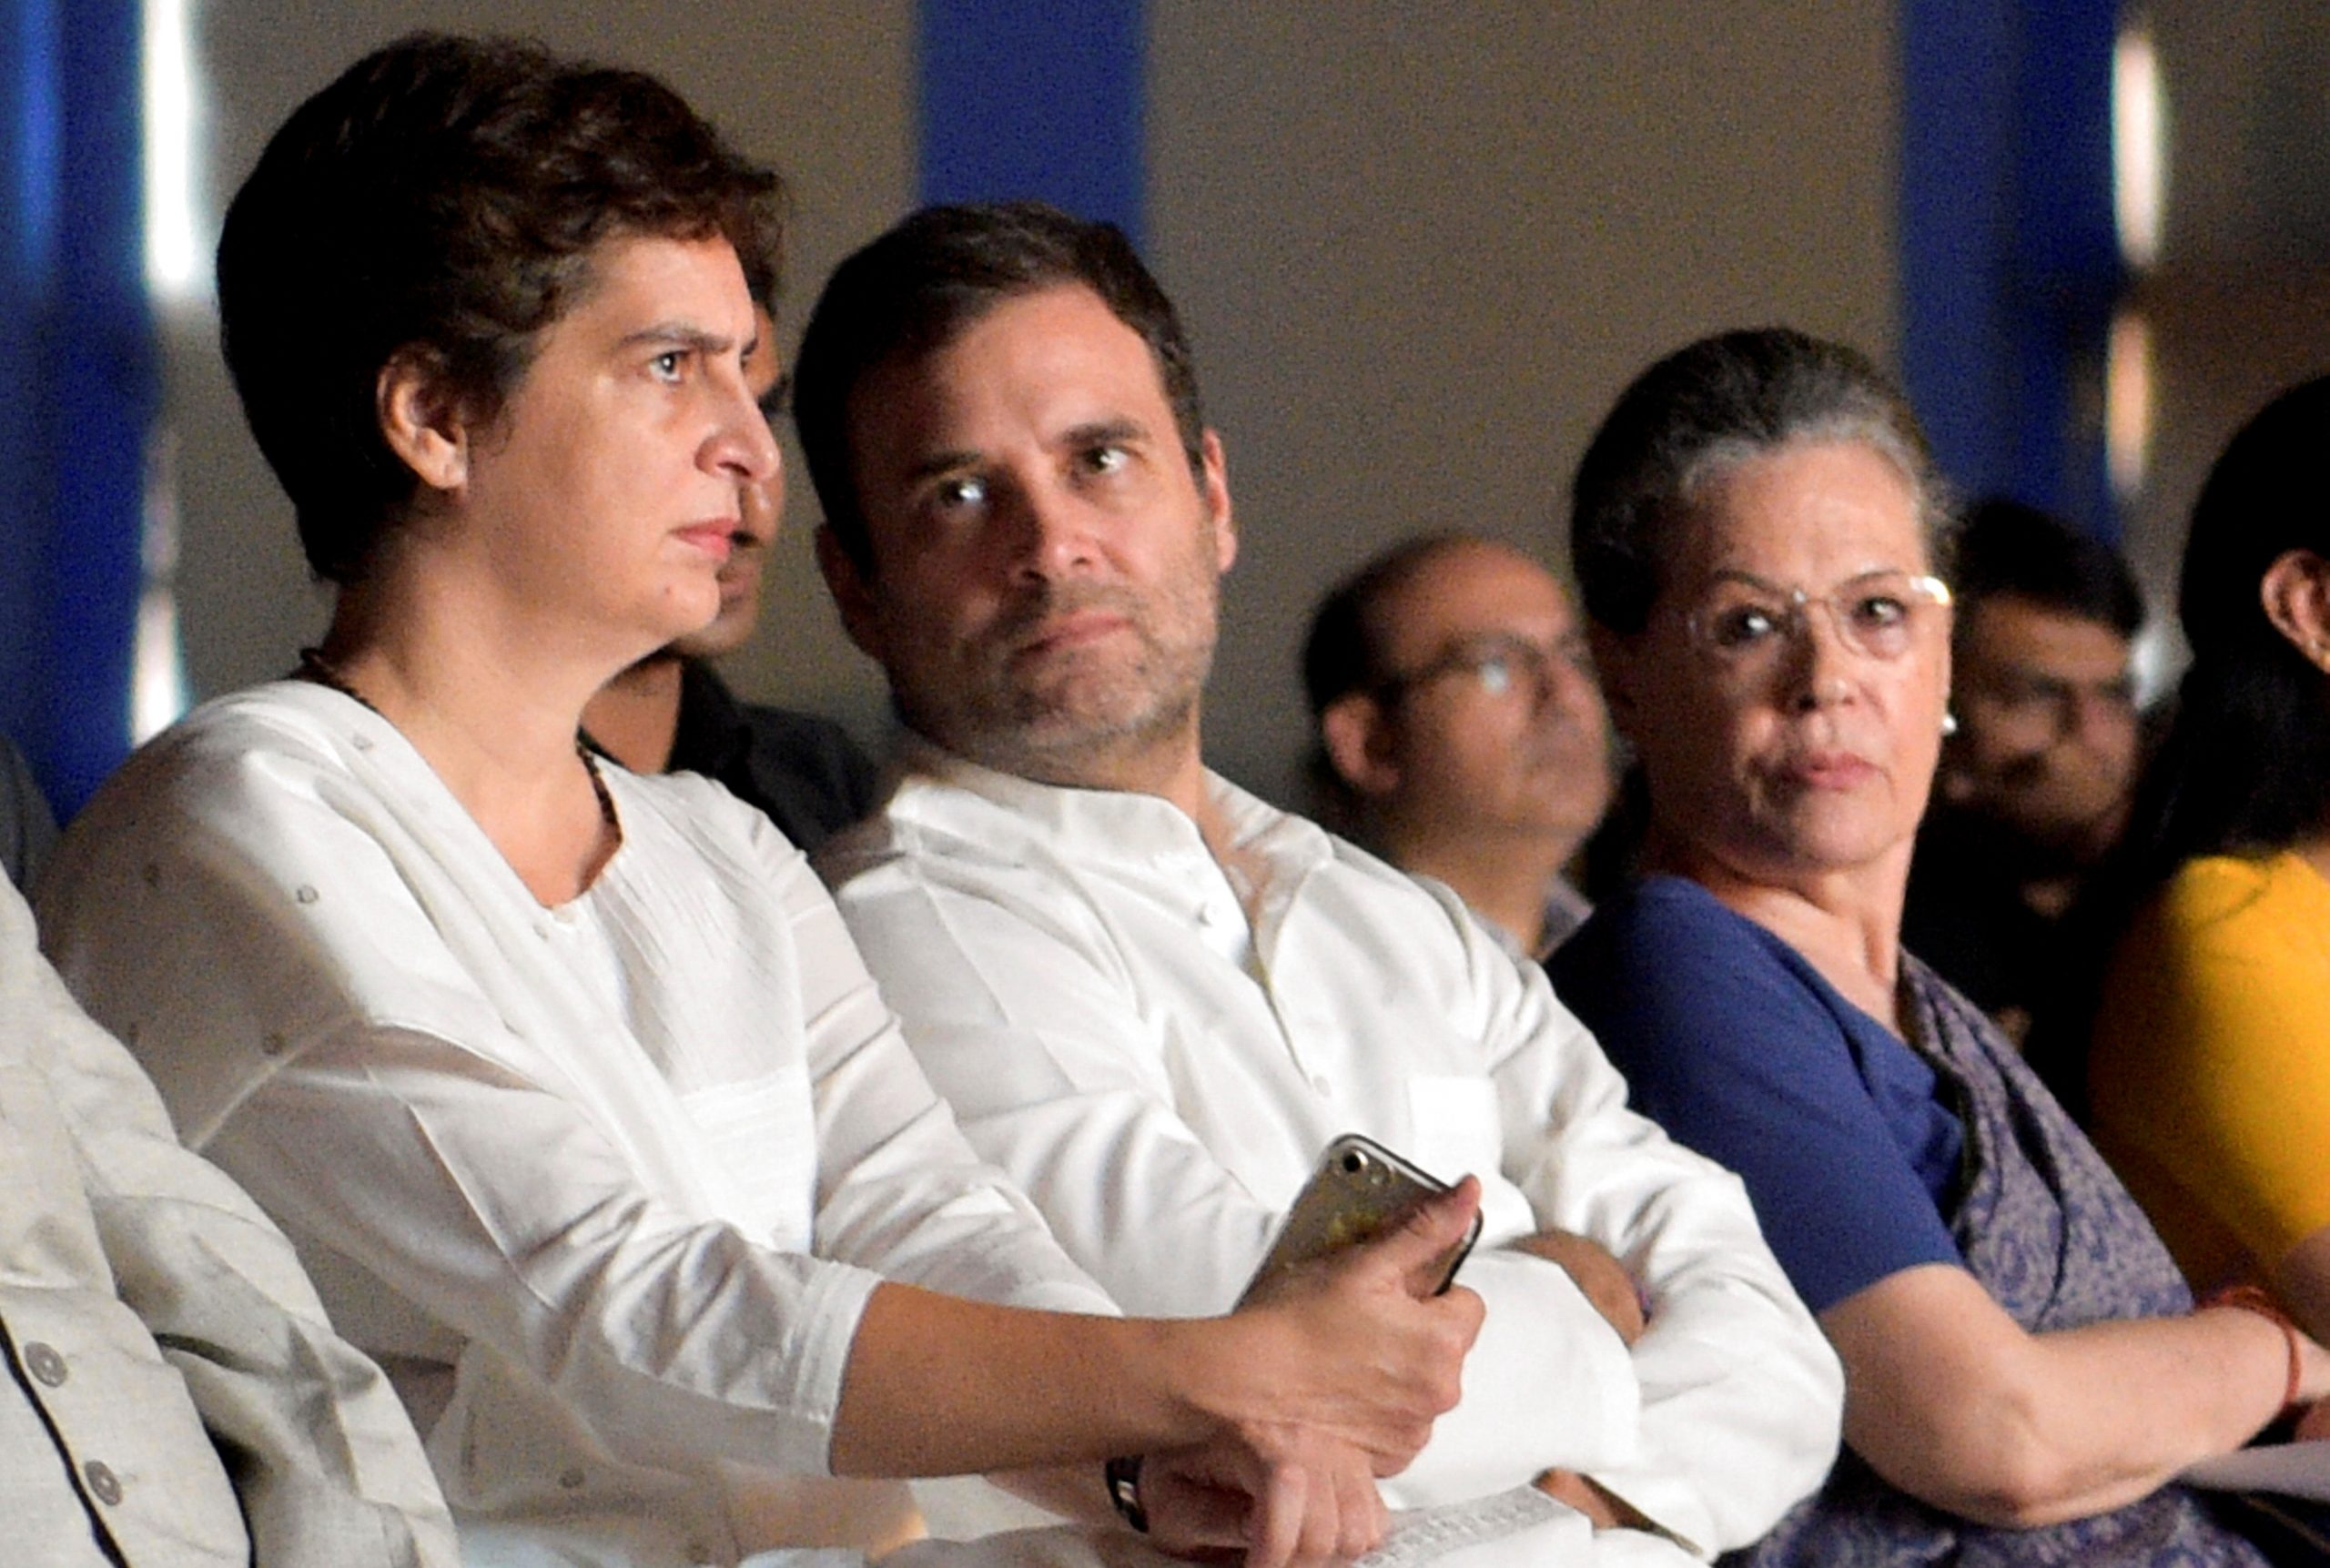 After storm over dissent note, Congress in rapproachment mode